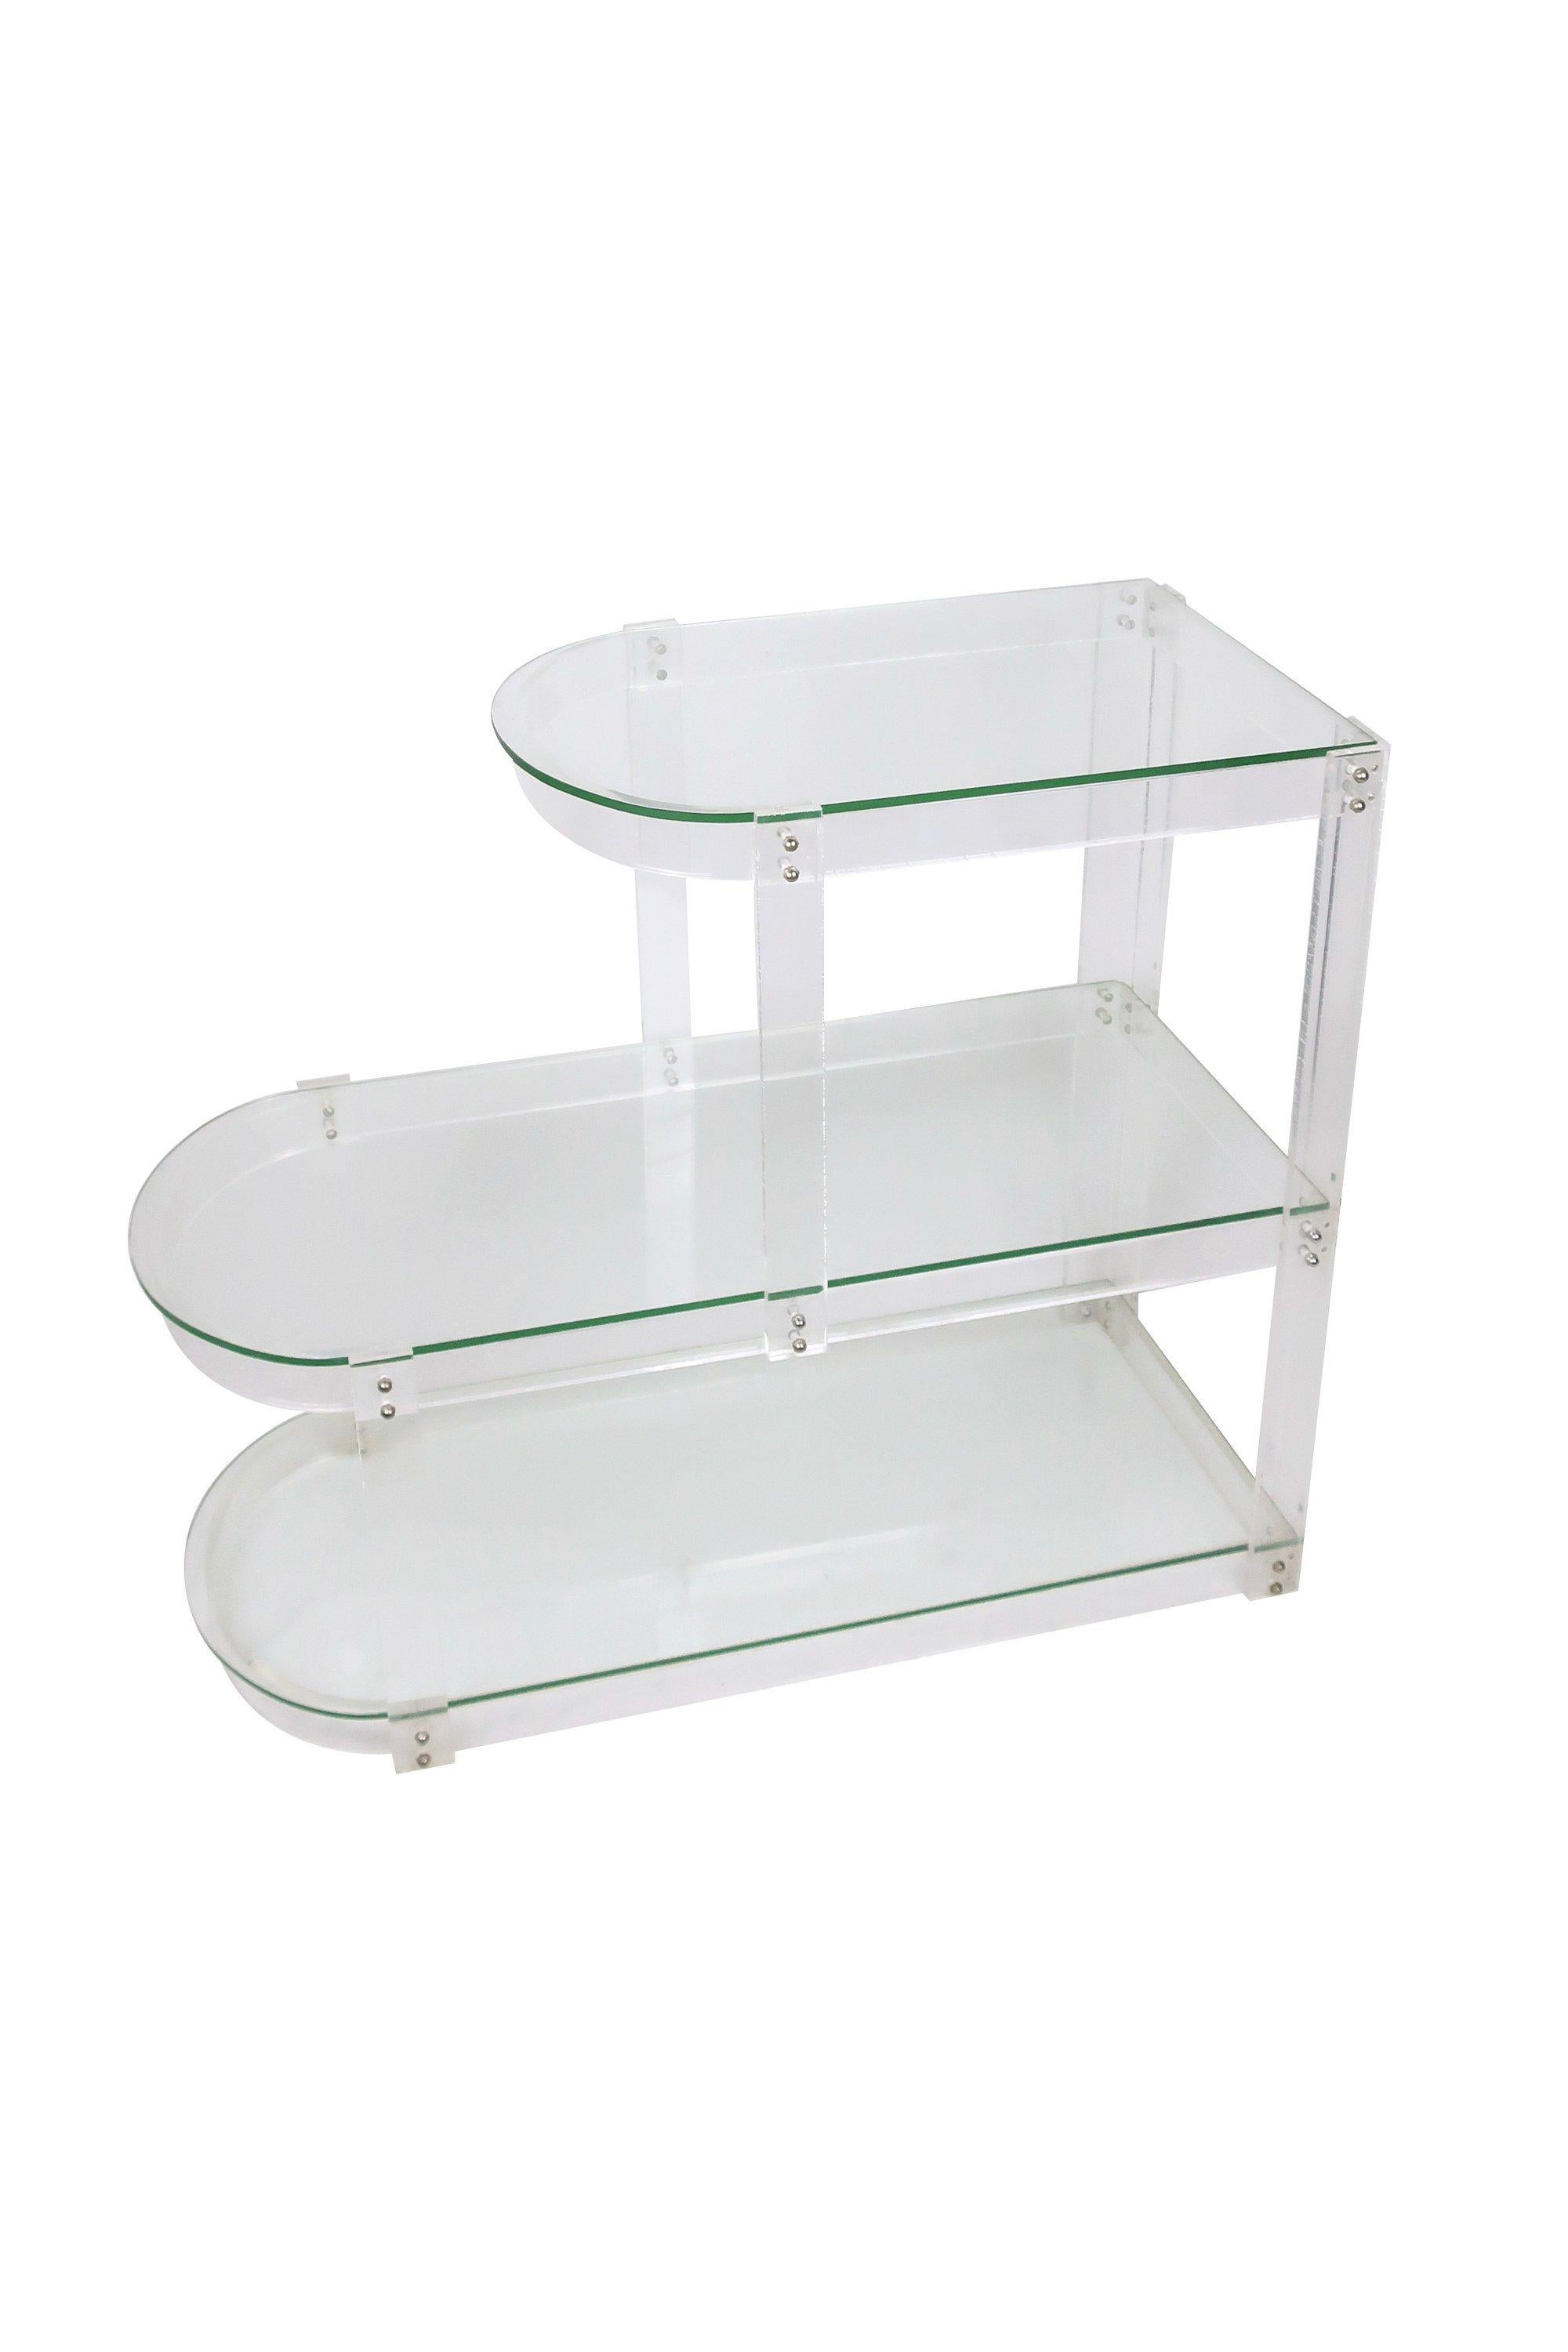 A Mid-Century Modern Lucite and glass shelving unit that is small enough to be used as a side table, bookshelf, bar, or even a console table. In the style of Charles Hollis Jones.
 
In excellent vintage condition. Unsigned.
 
Measures: 13” x 29”